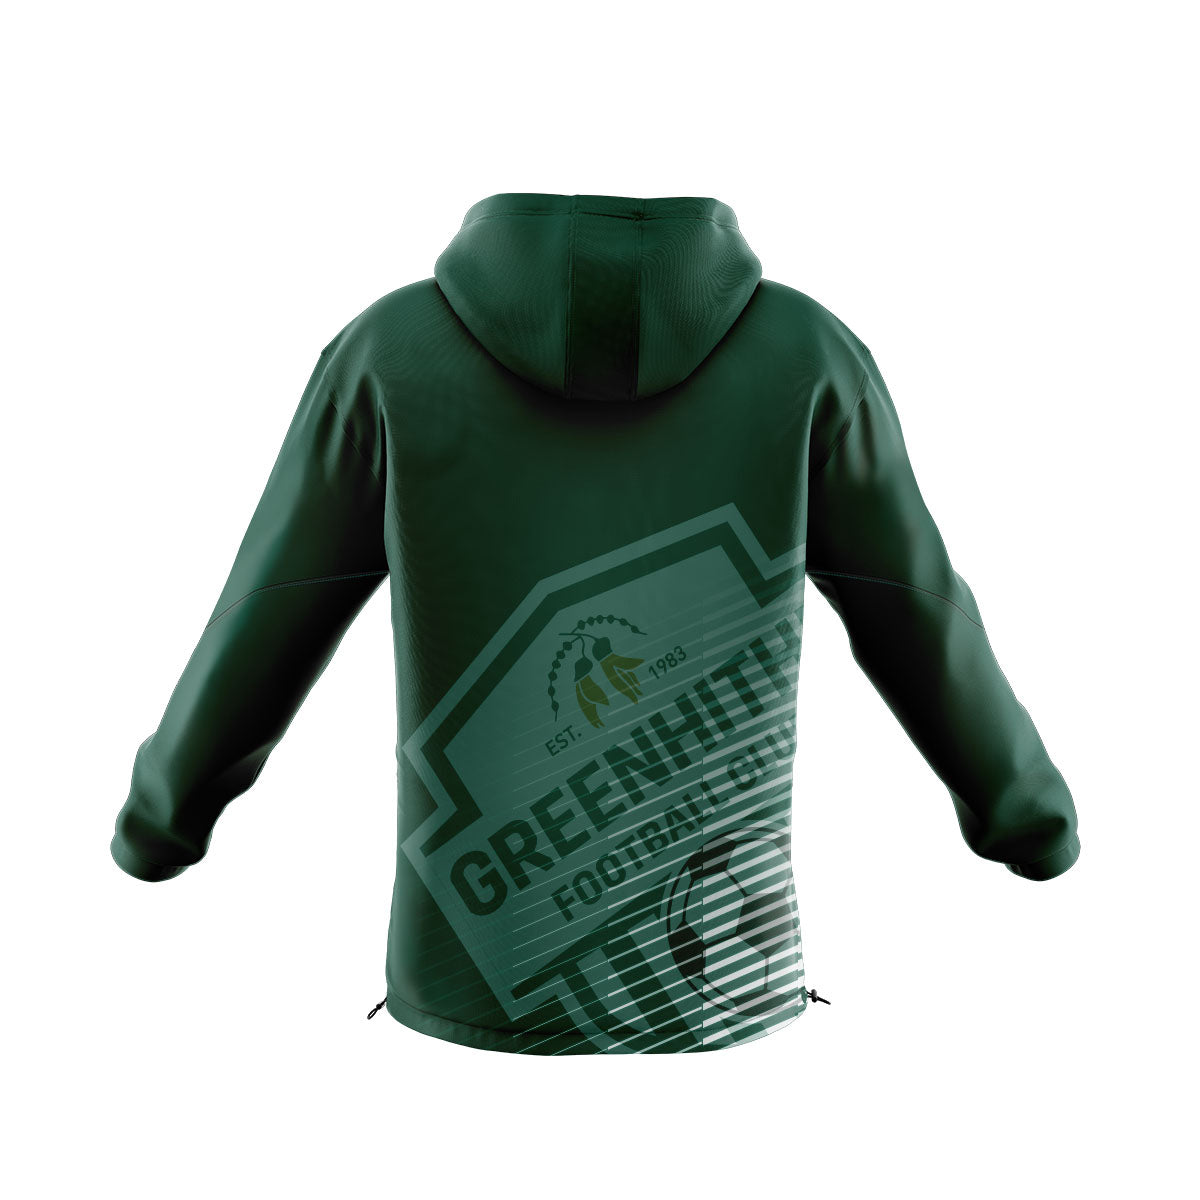 Greenhithe Football Club Players Wet Weather Jacket - Junior